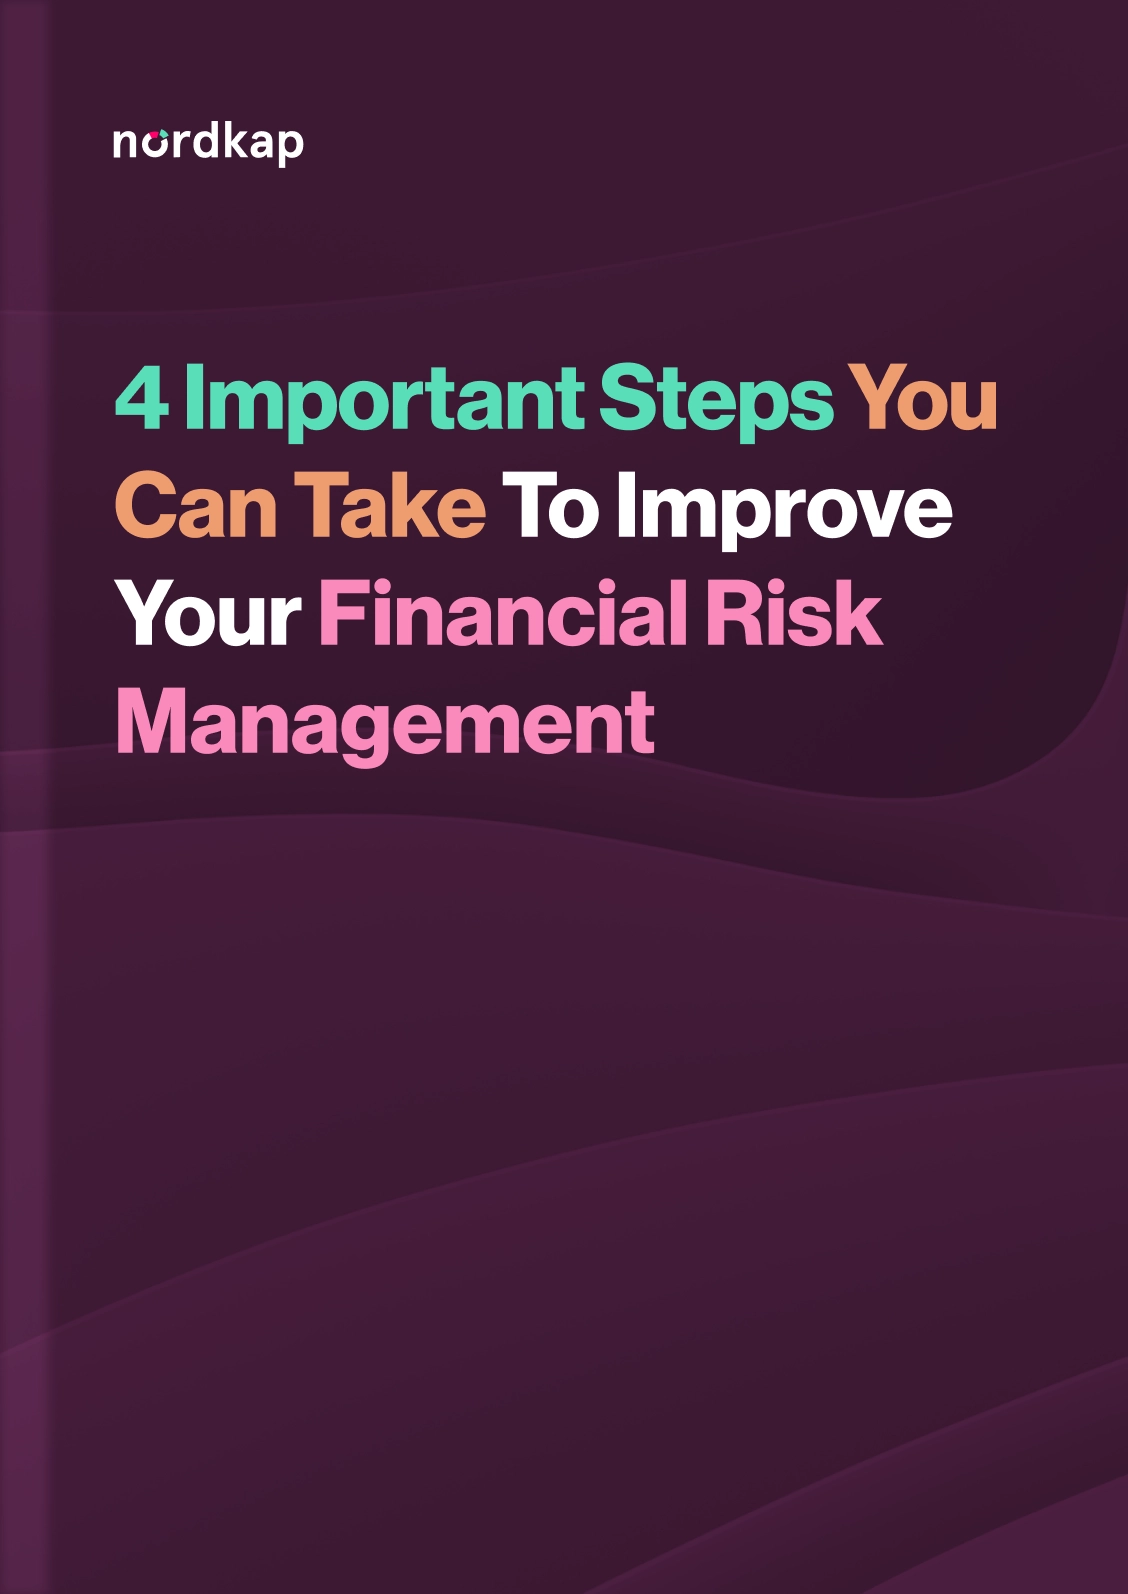 4-important-steps-you-can-take-to-improve-your-financial-risk-management (1)